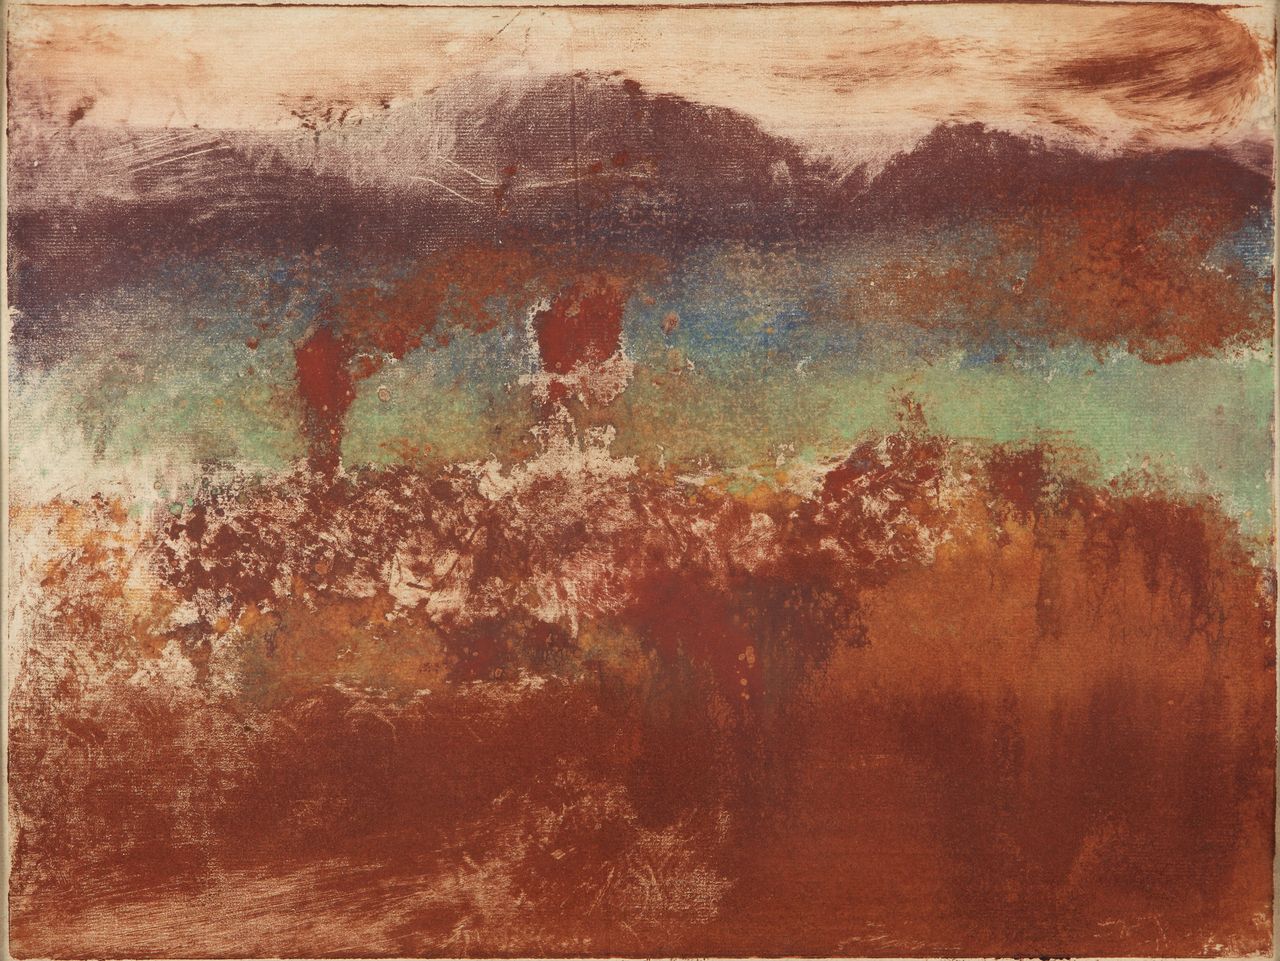 Edgar Degas (French, 1834–1917). Autumn Landscape (L’Estérel), 1890. Monotype in oil on paper. Plate: 11 7/8 x 15 3/4 in. (30.2 x 40 cm), sheet: 12 1/2 x 16 1/4 in. (31.8 x 41.3 cm). Private collection.